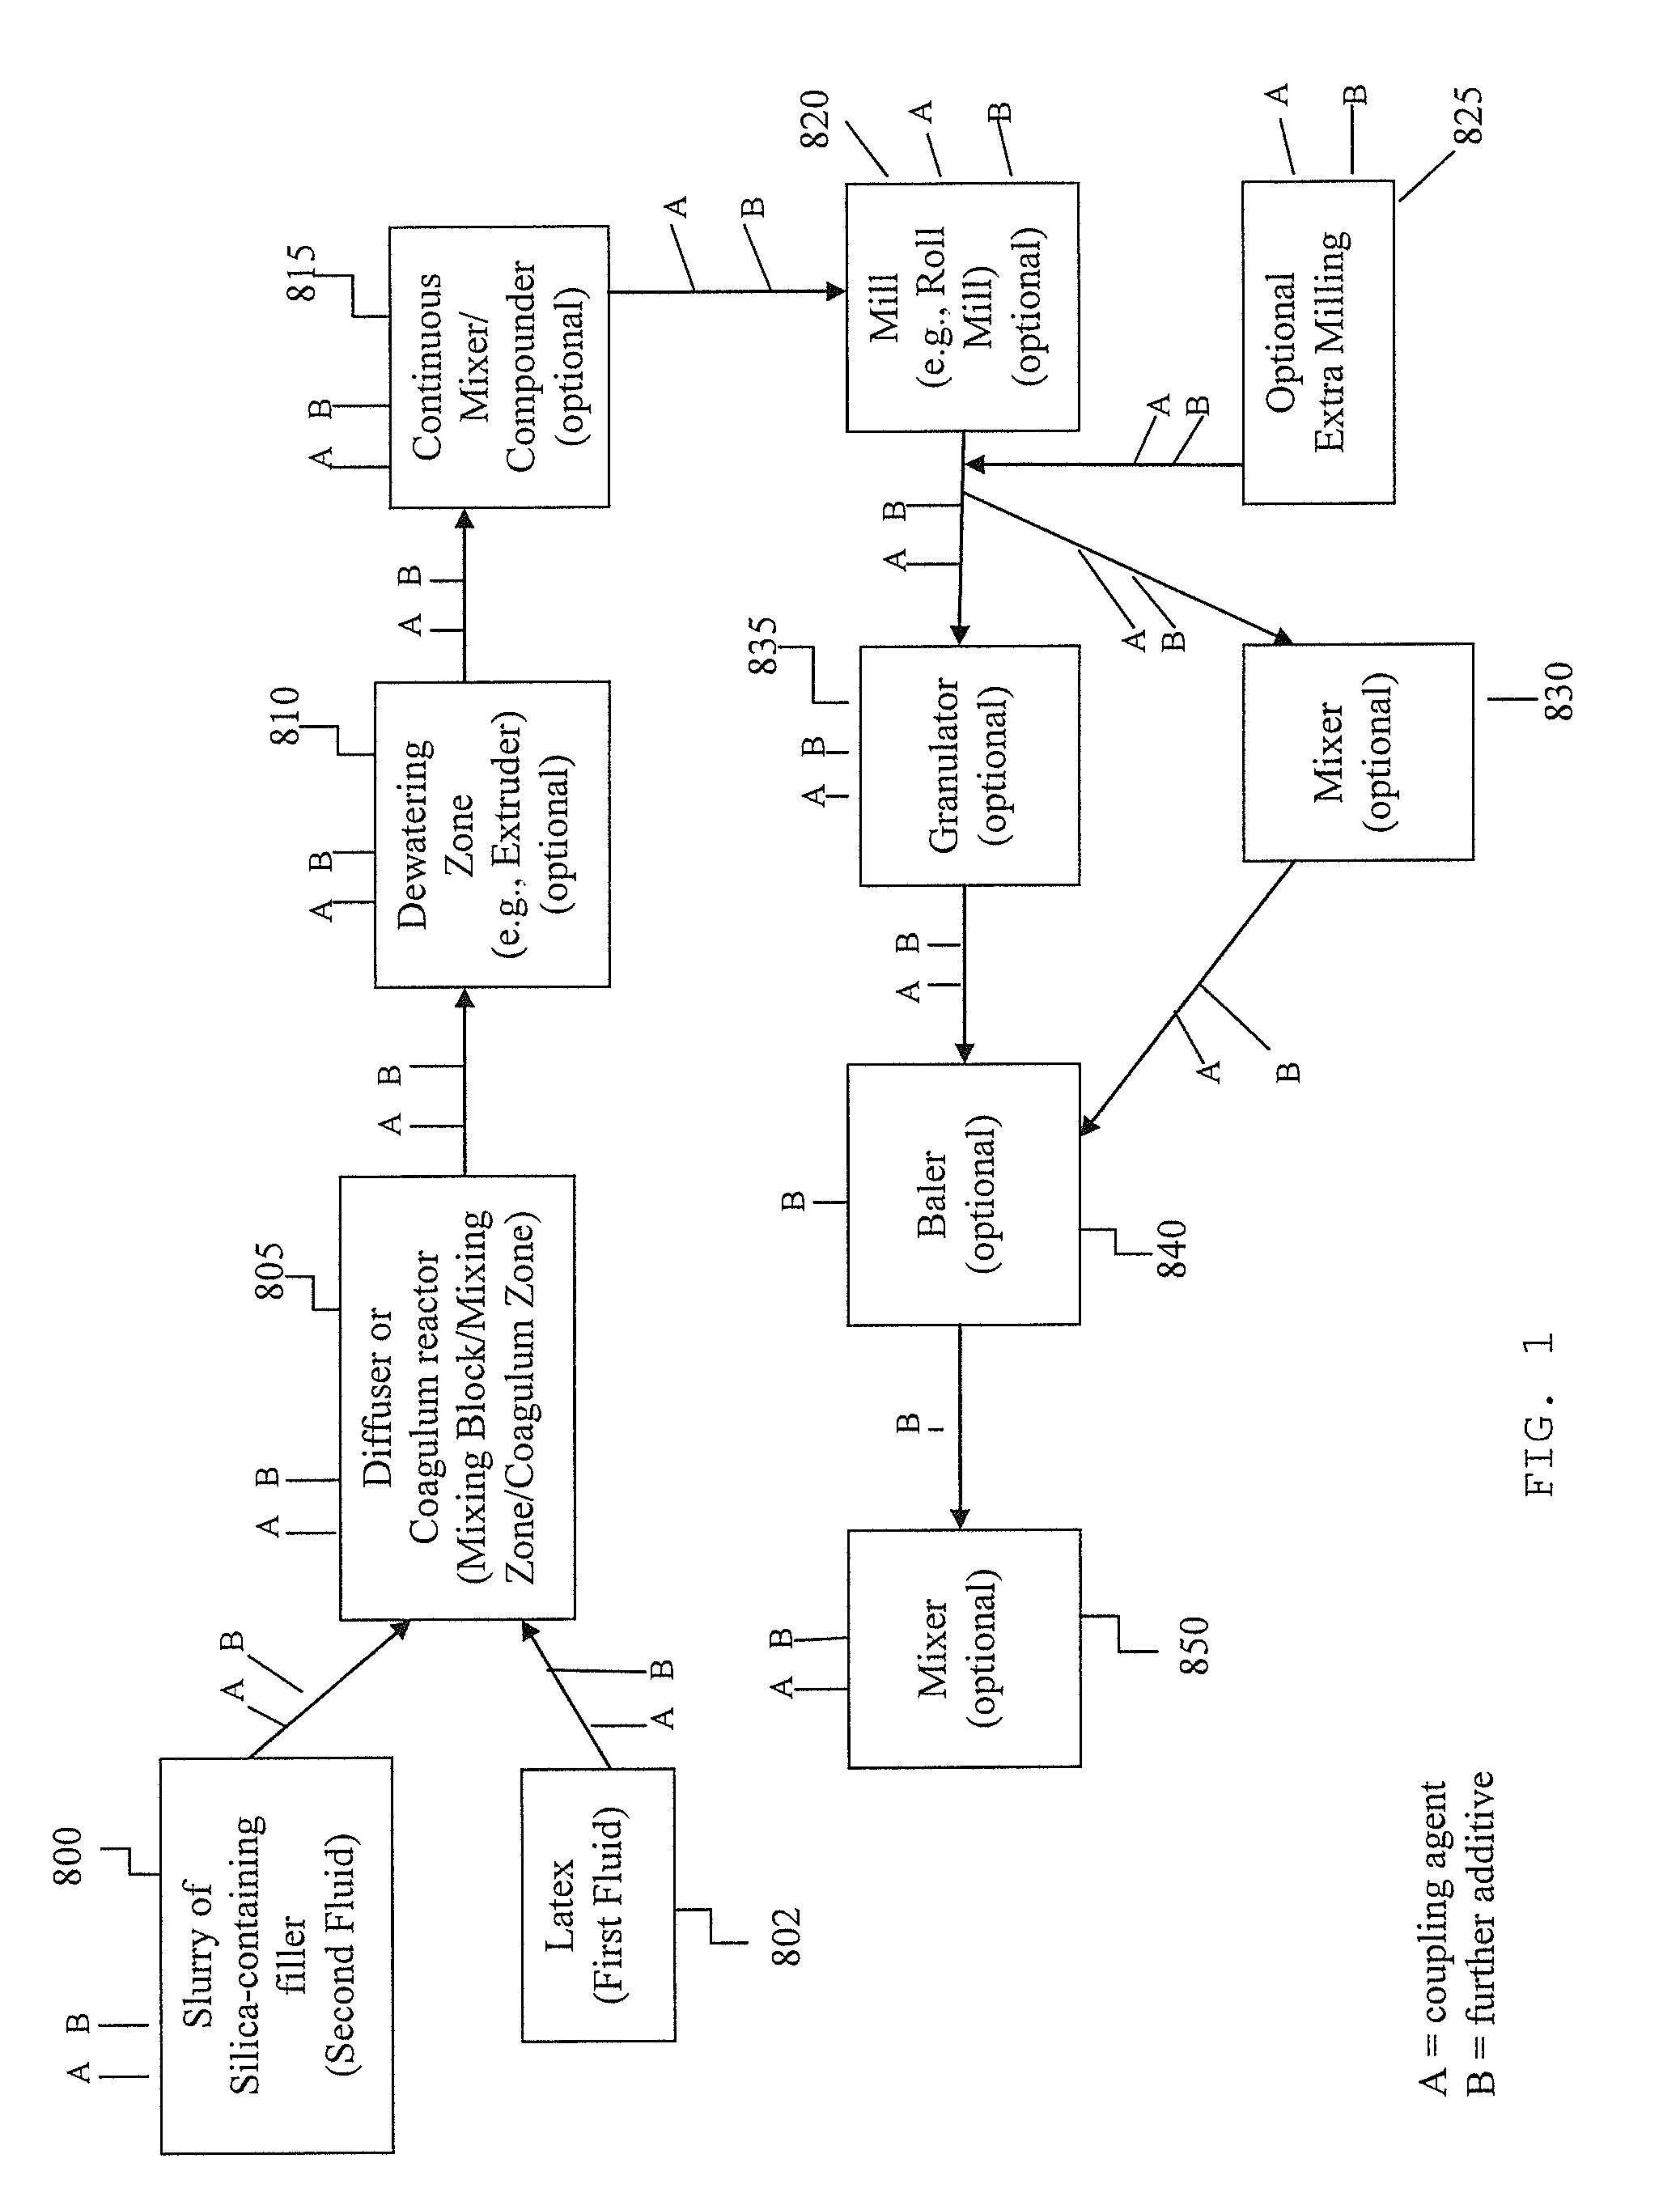 Elastomer composite with silica-containing filler and methods to produce same